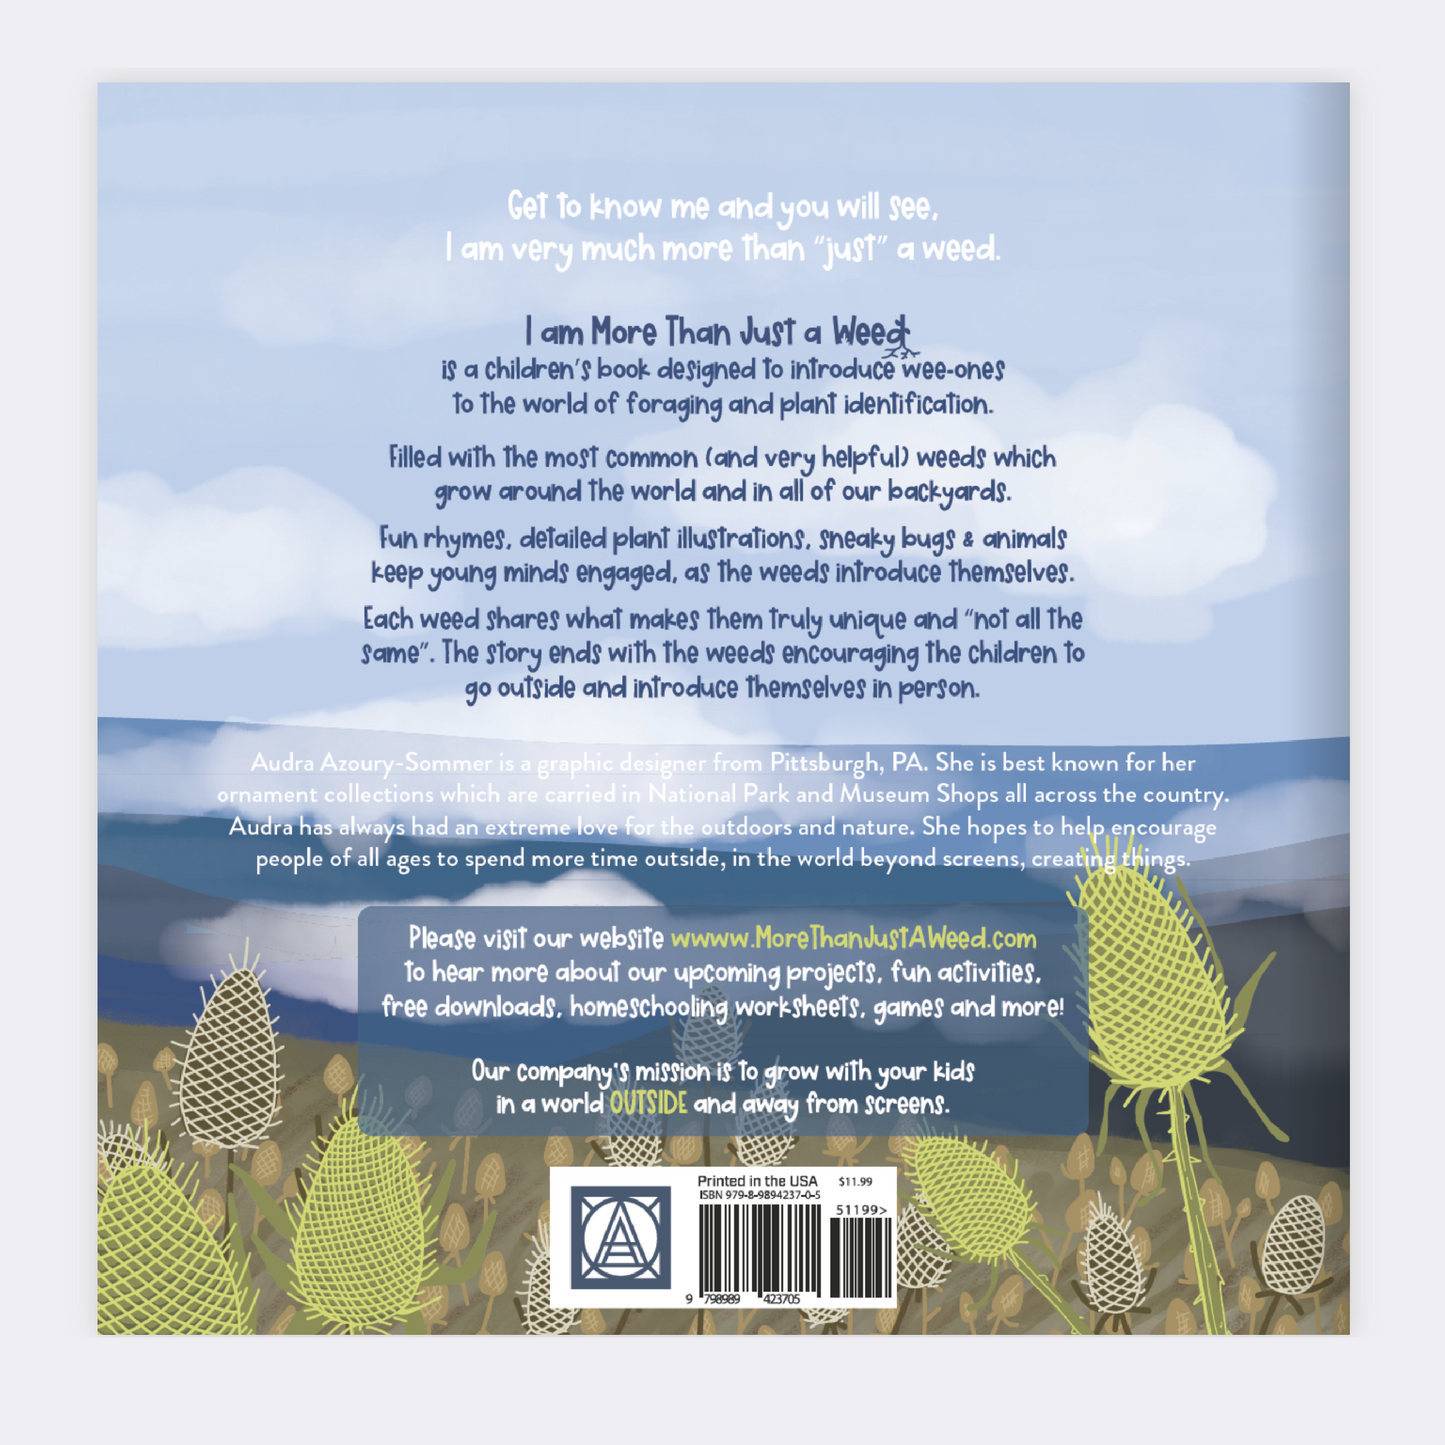 I am More Than "Just" a Weed - softcover children's book